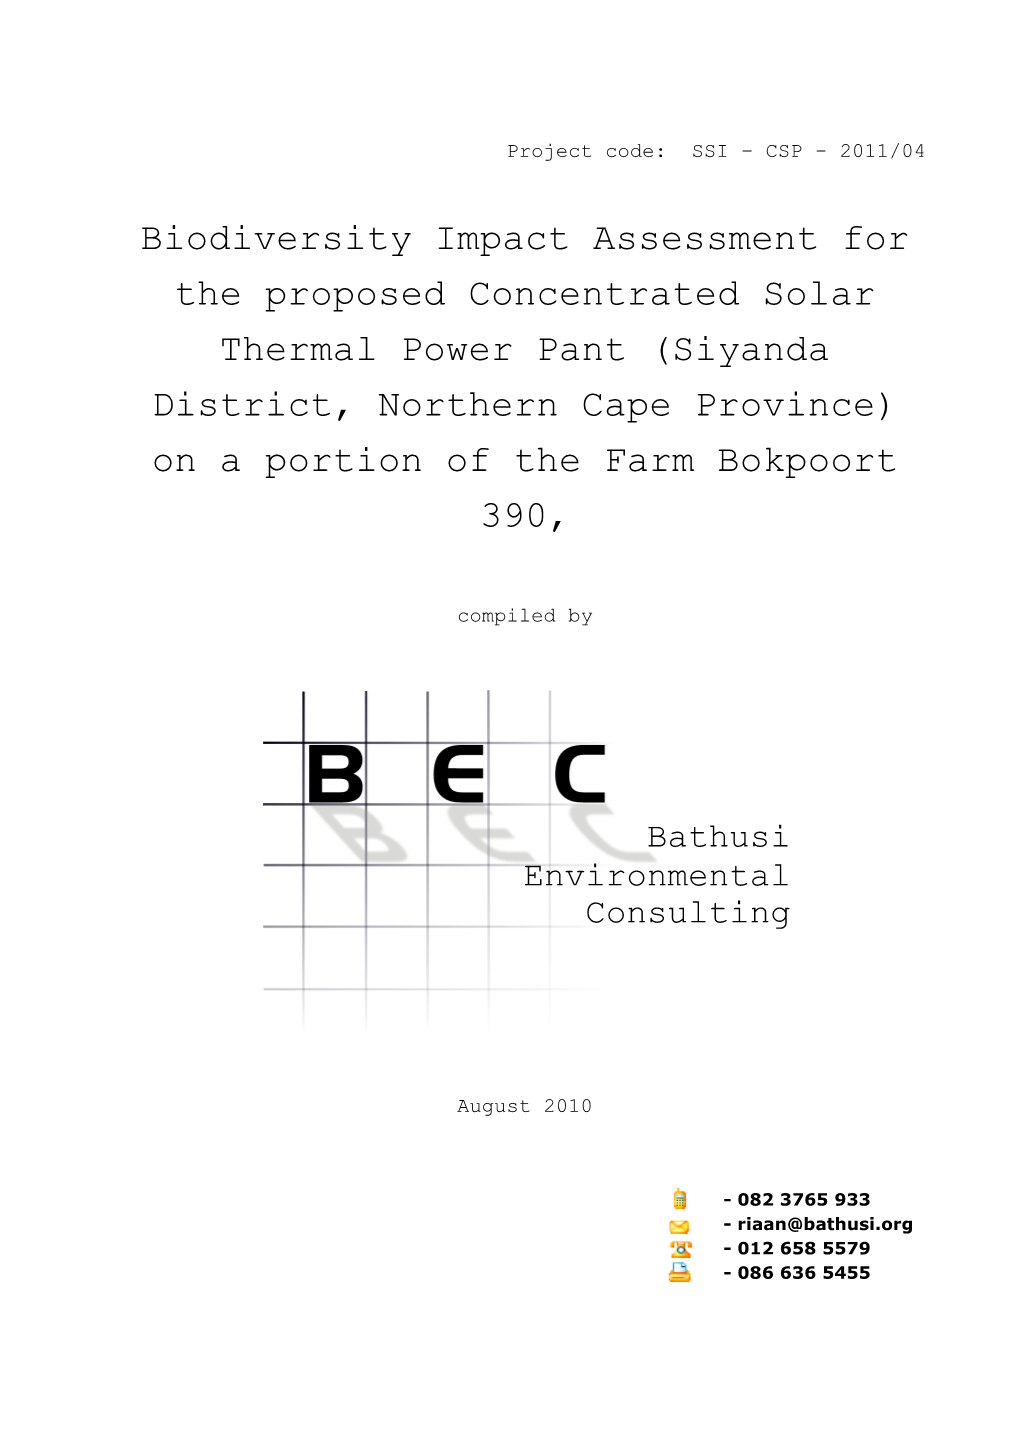 Biodiversity Impact Assessment for the Proposed Concentrated Solar